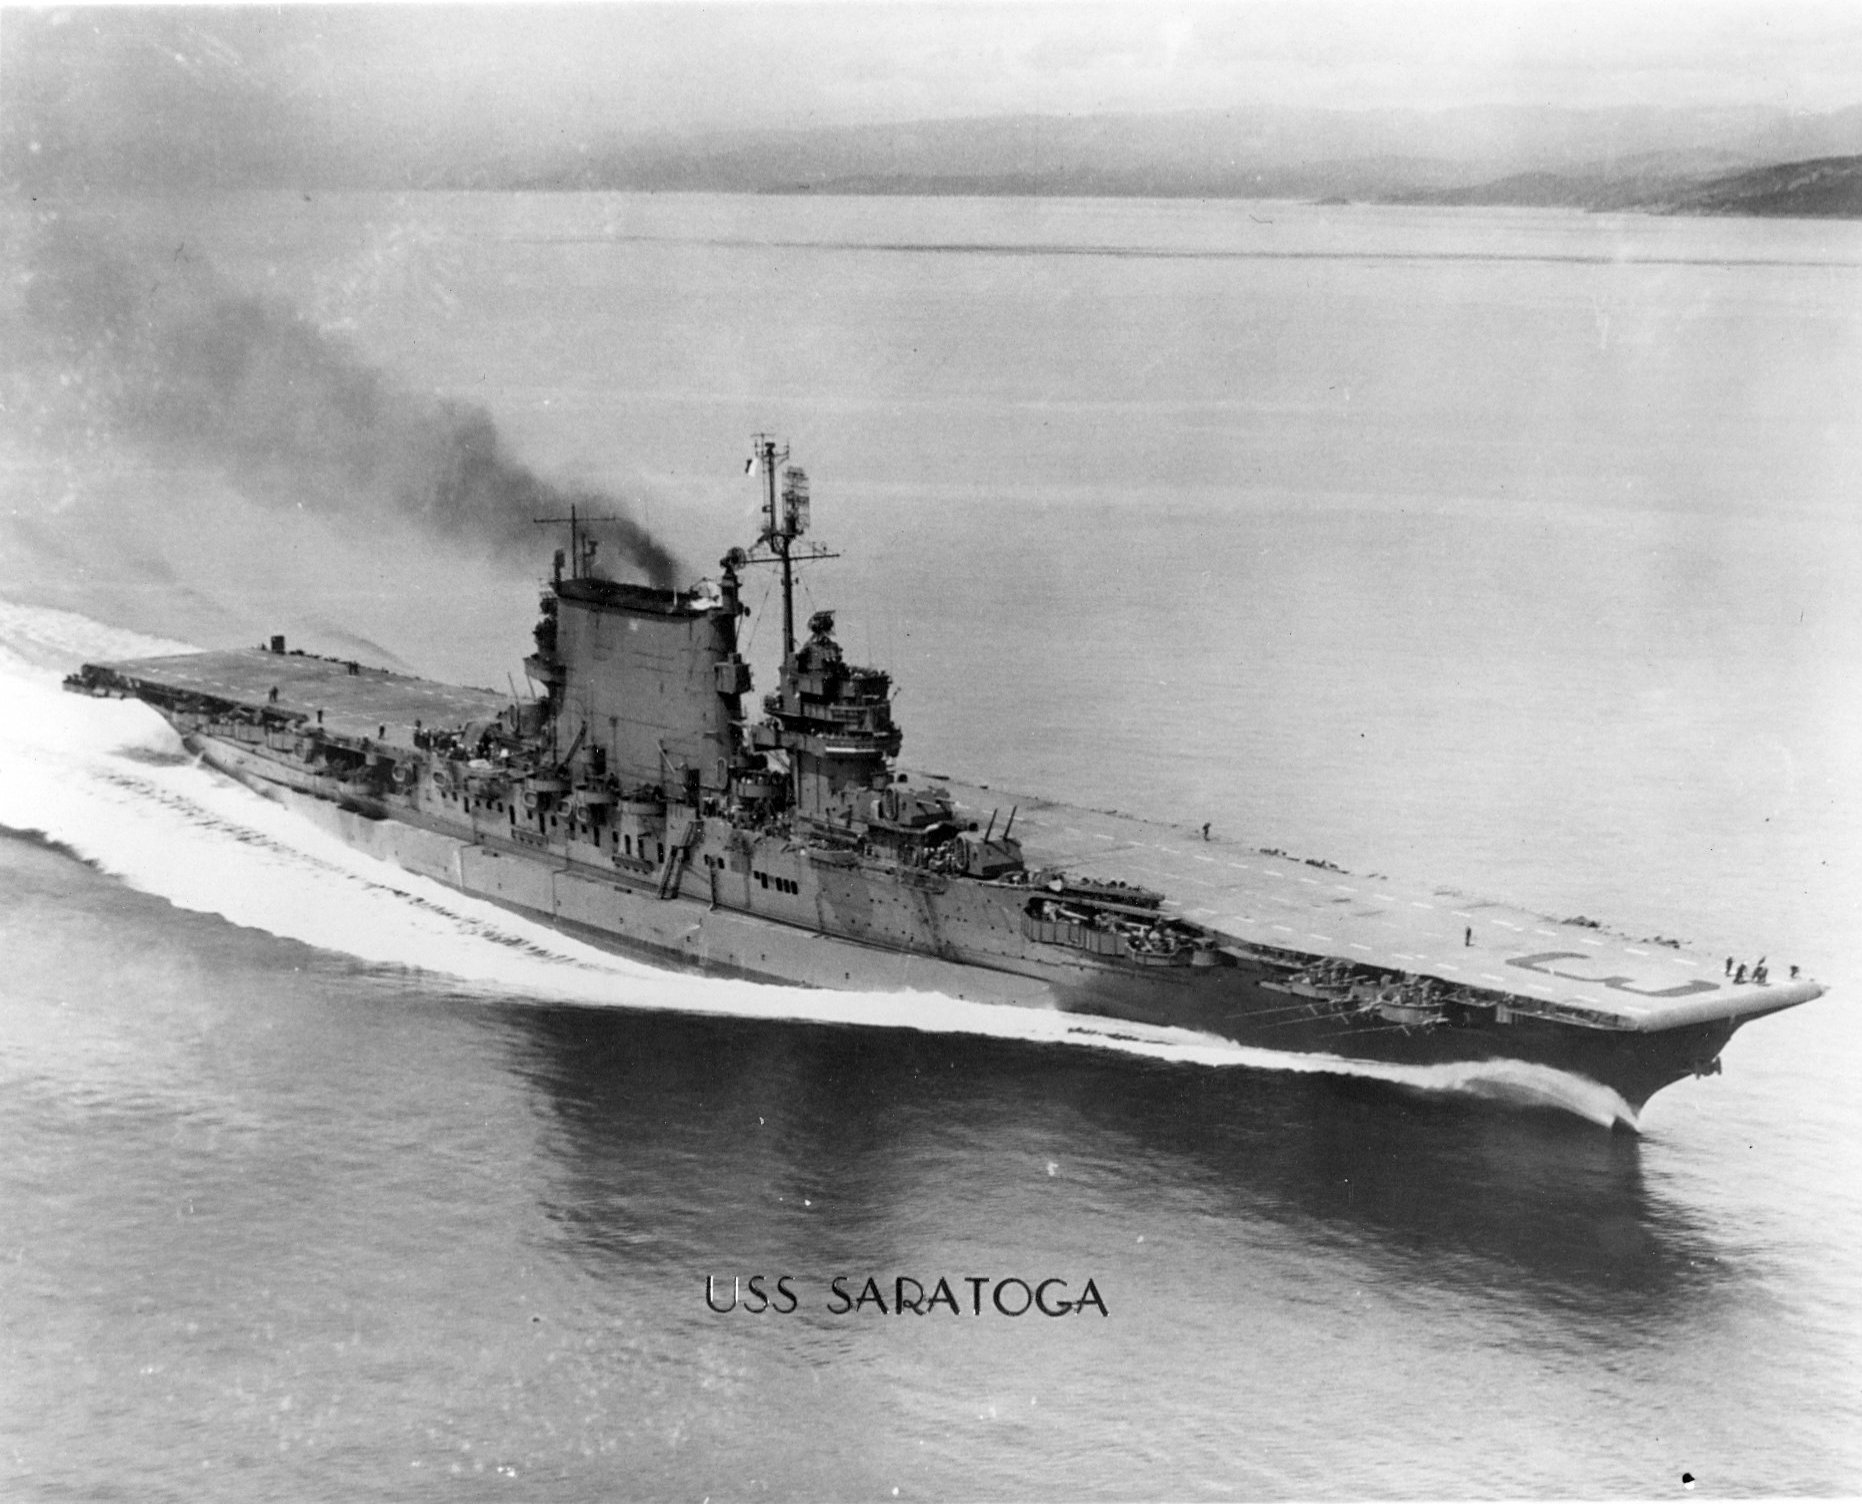 Saratoga running full power trials in Puget Sound, Washington, United States, following battle damage repairs, 15 May 1945. Photo 2 of 2.